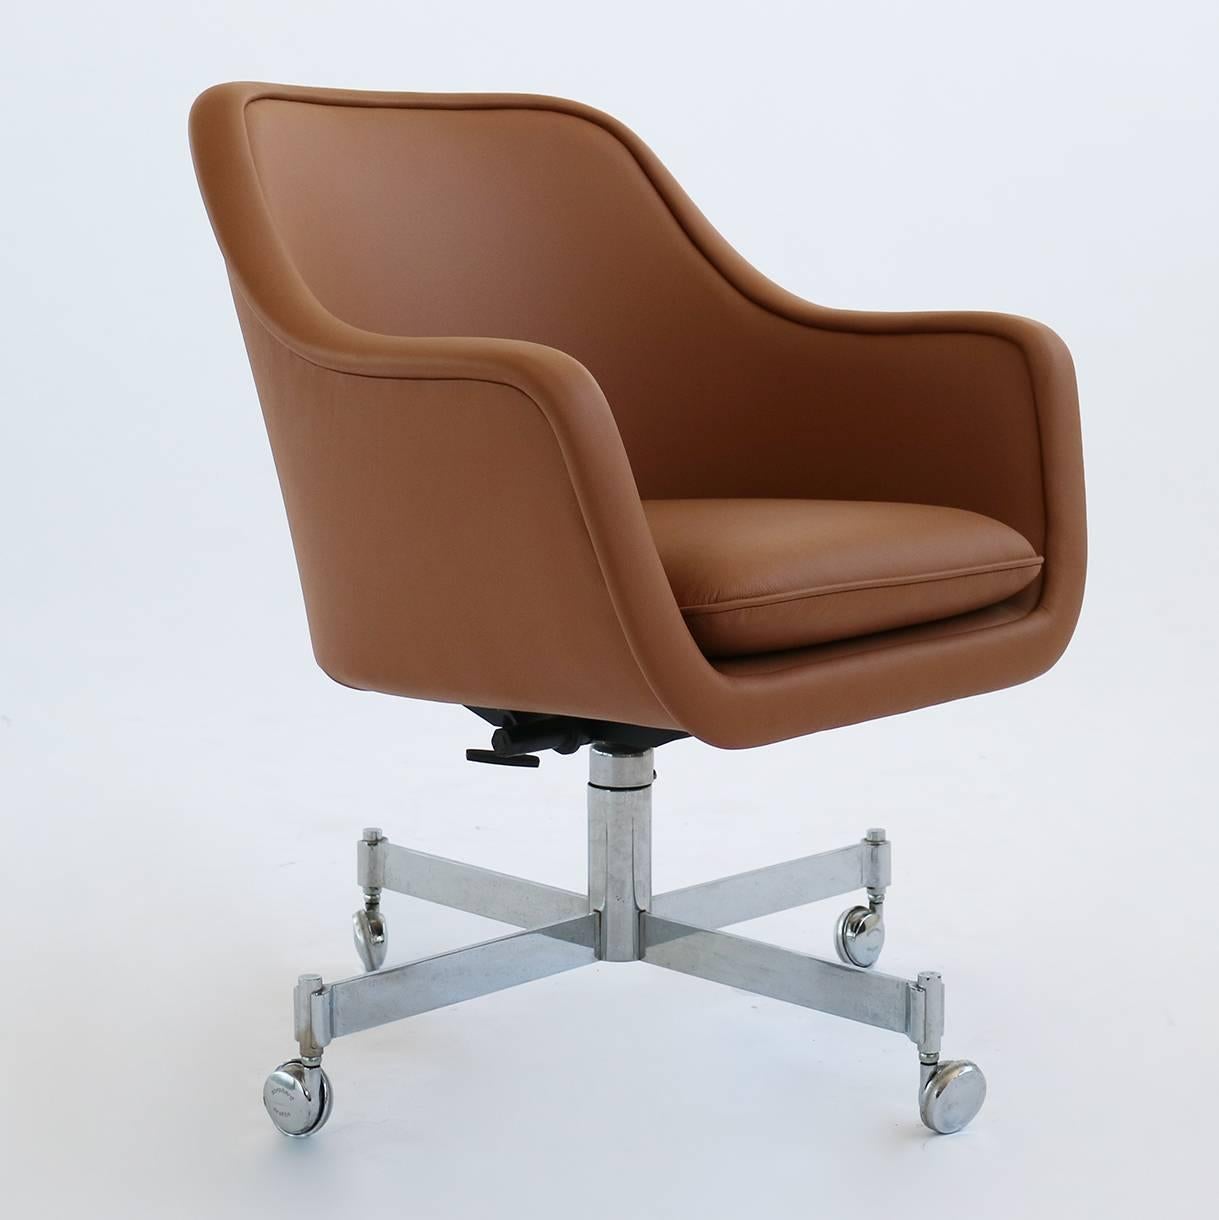 Desk chair by Ward Bennett. Reupholstered in a tan colored leather. The base, tilts, swivels, and has an adjustable height.  Arm Height is 25.5